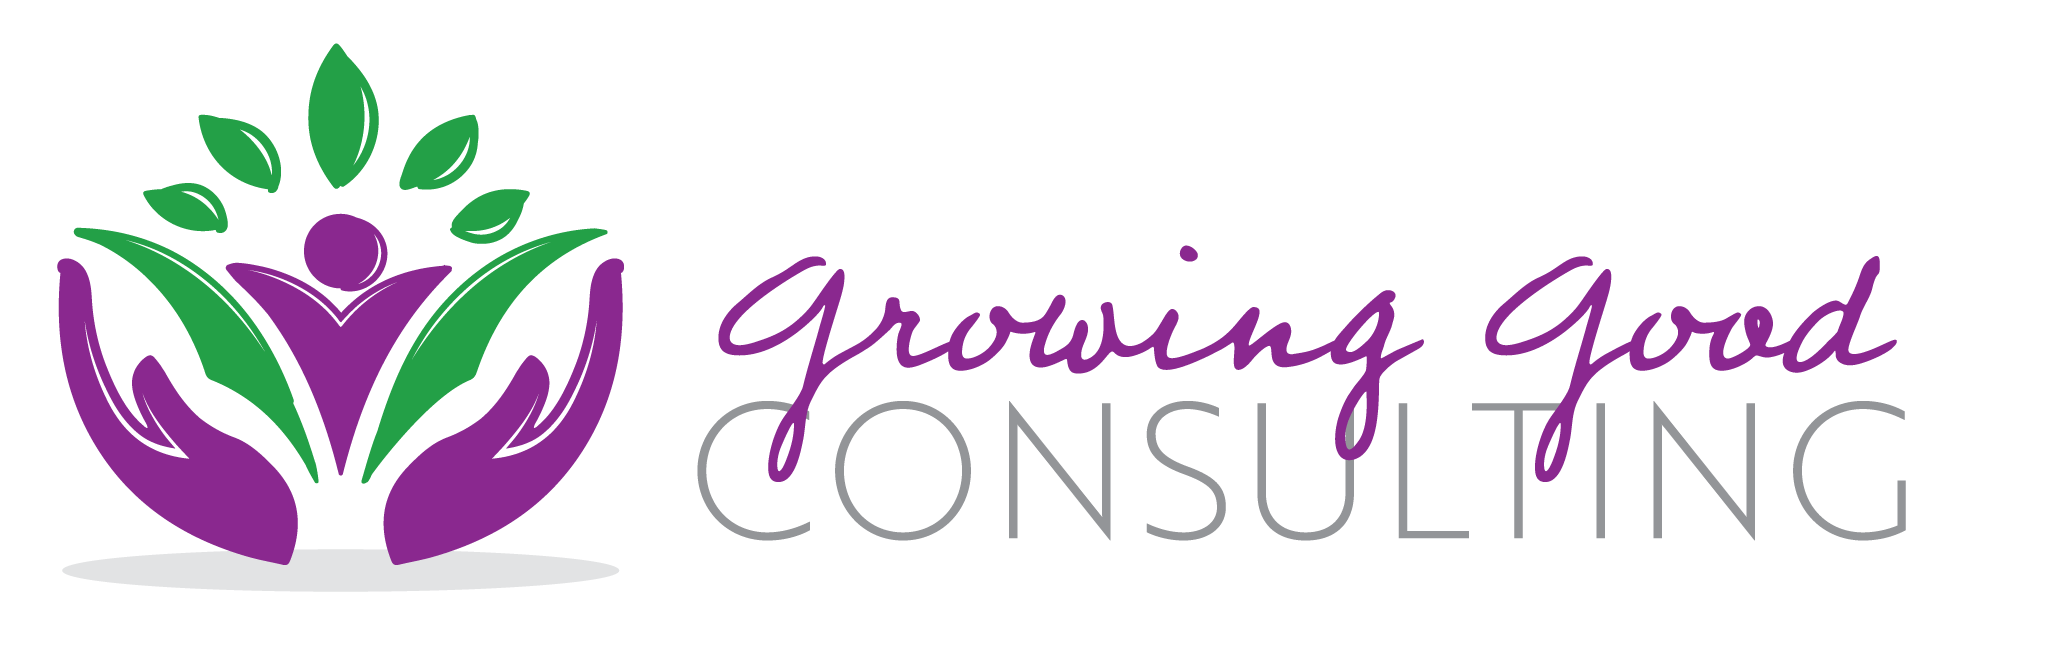 Growing Good Consulting Logo